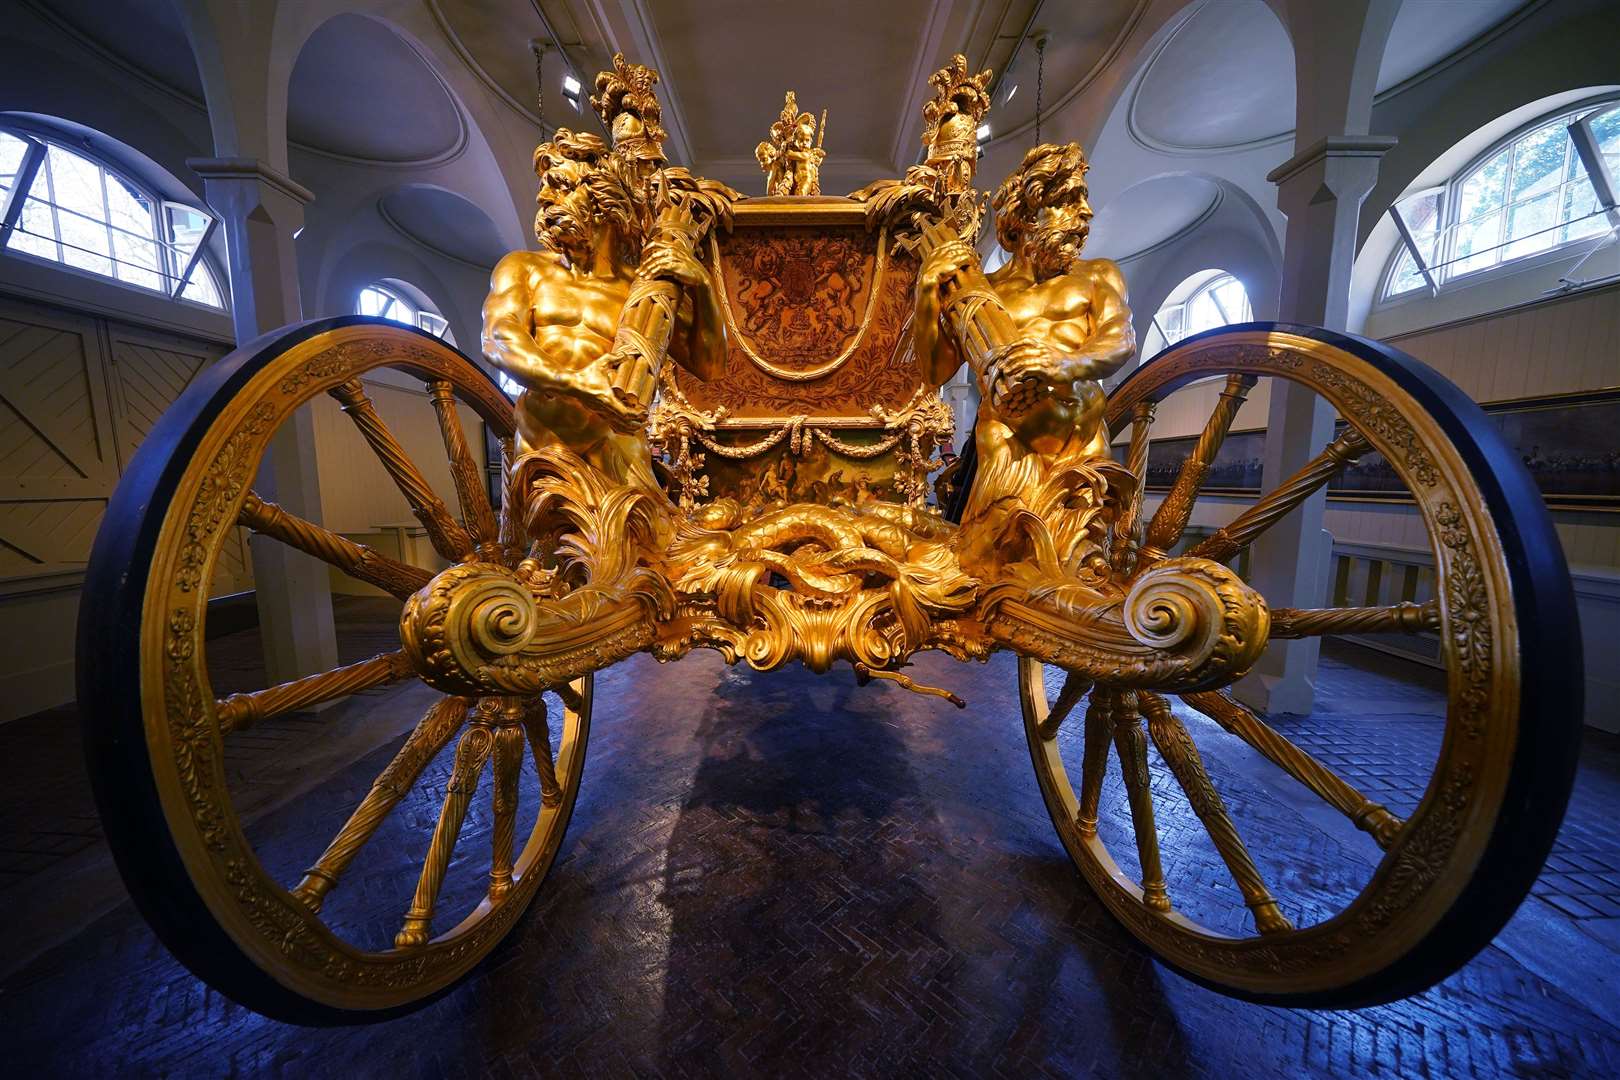 The Gold State Coach features, above each wheel, a massive triton figure in gilded walnut wood (Yui Mok/PA)